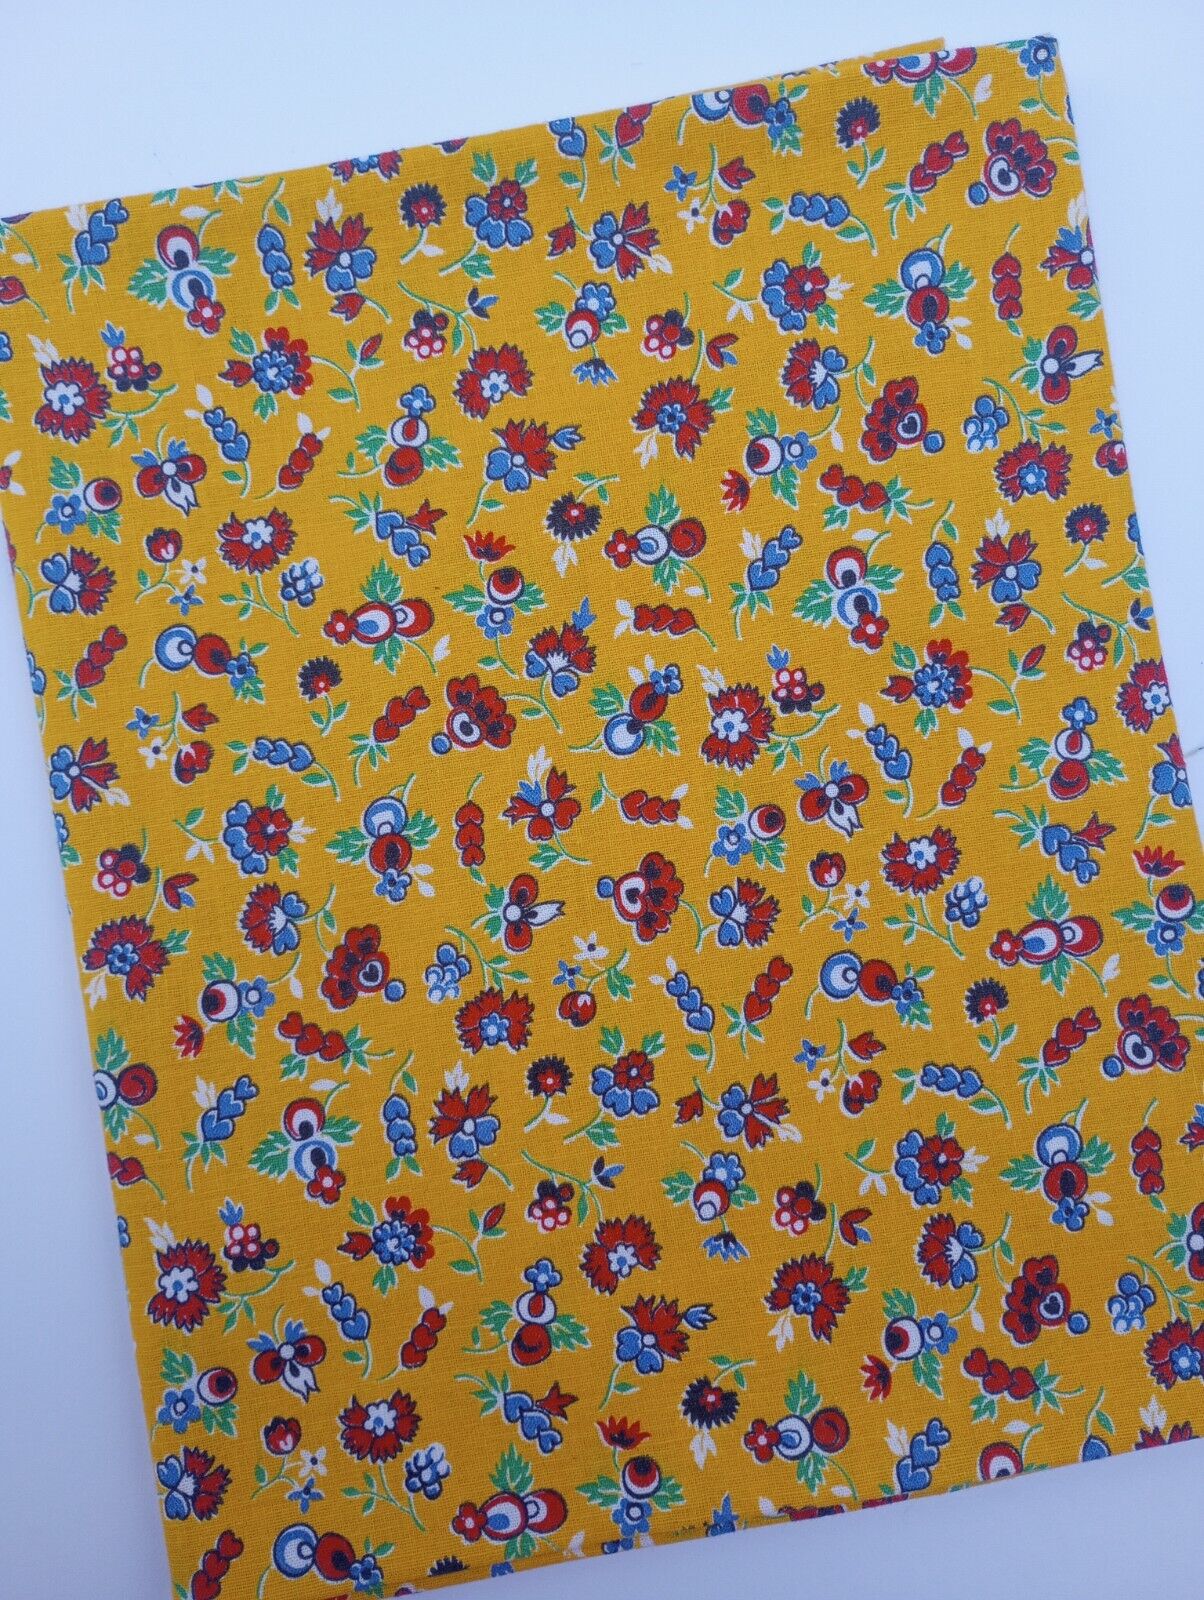 Vintage Full Feedsack Fabric 37x44 Opened Yellow With Small Hearts & Flowers 